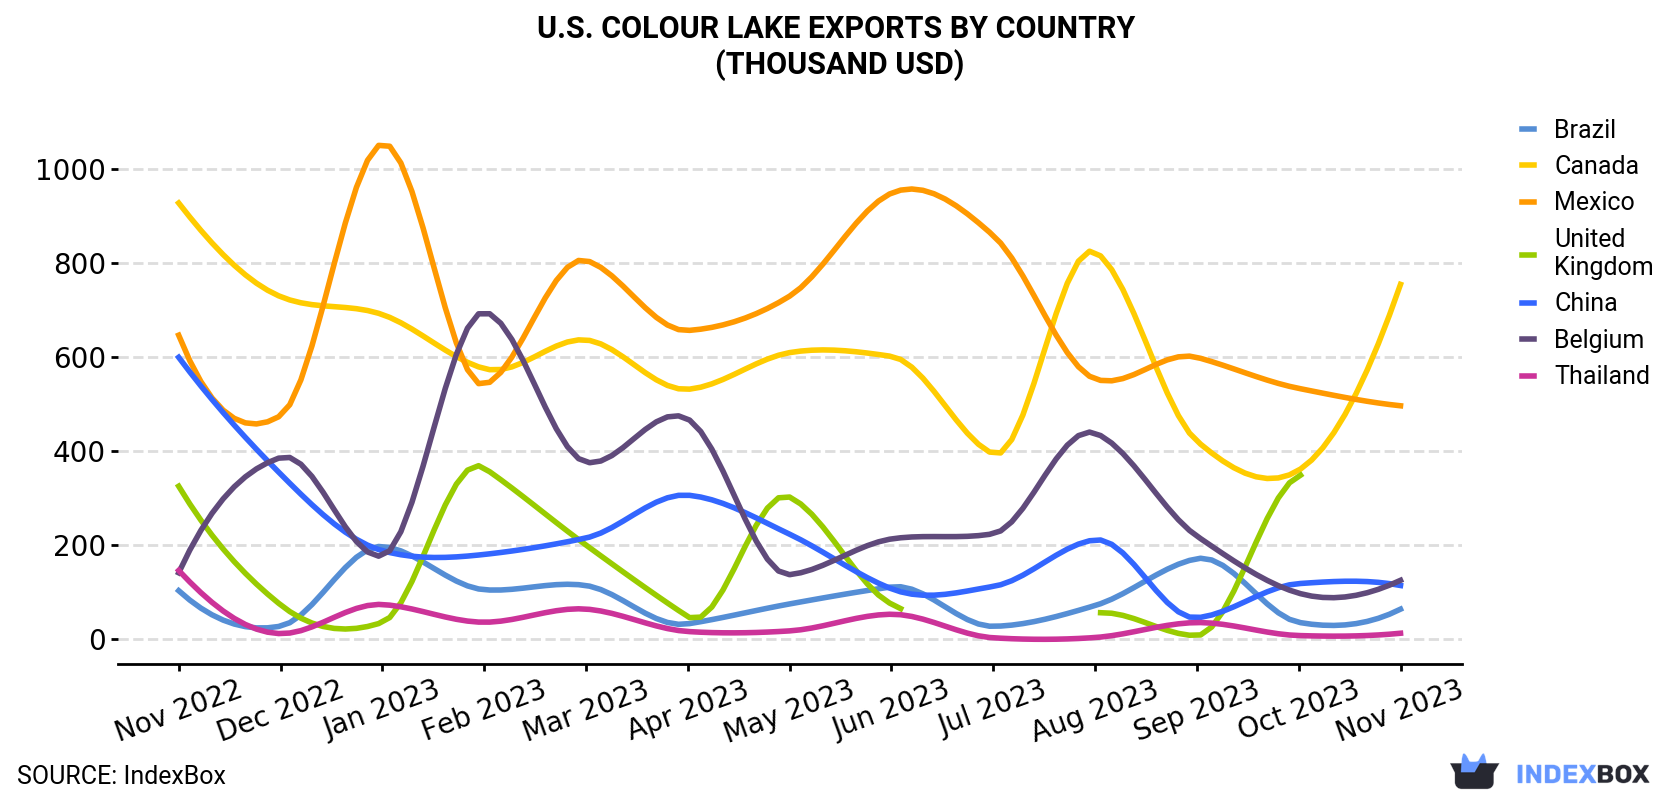 U.S. Colour Lake Exports By Country (Thousand USD)